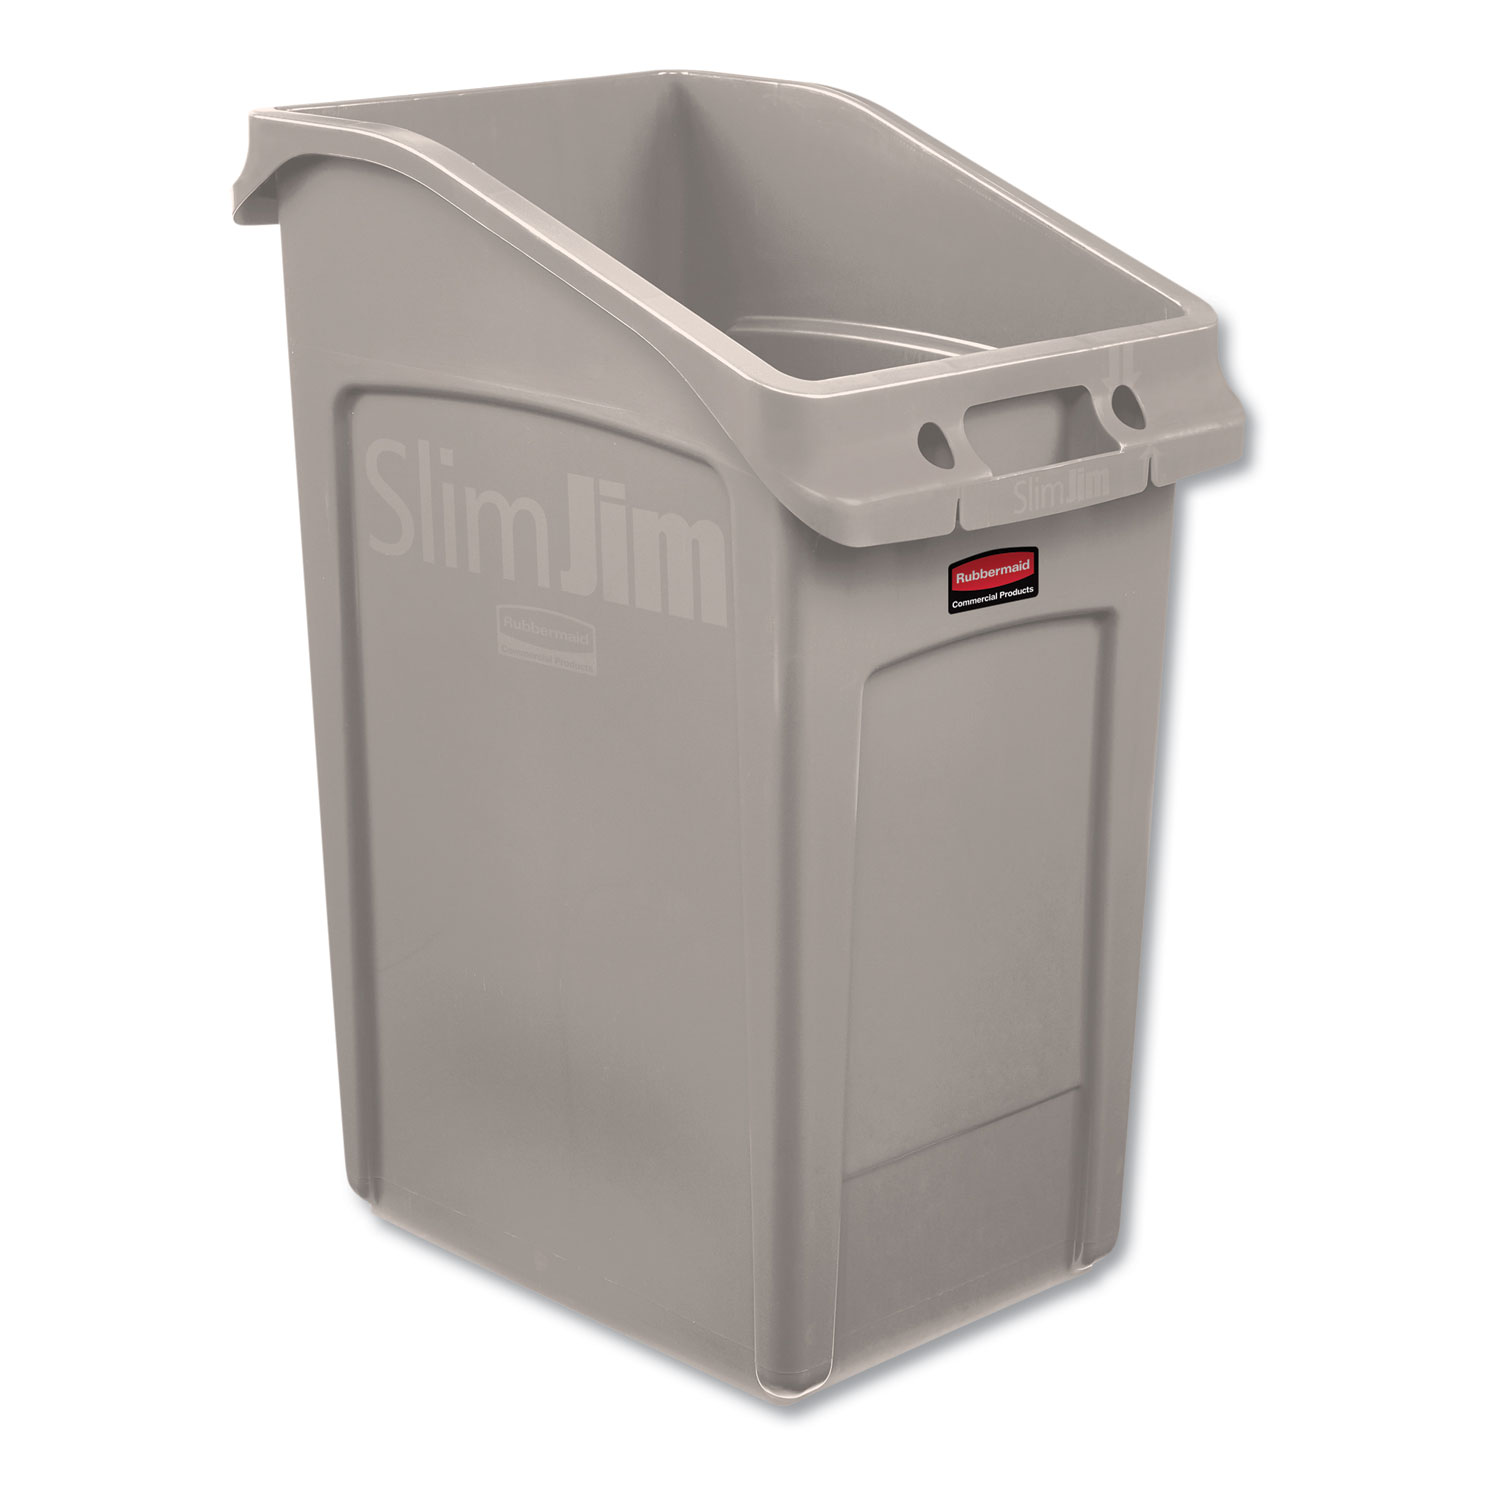  Rubbermaid Commercial 2026724 Slim Jim Under-Counter Container, 23 gal, Polyethylene, Beige (RCP2026724) 